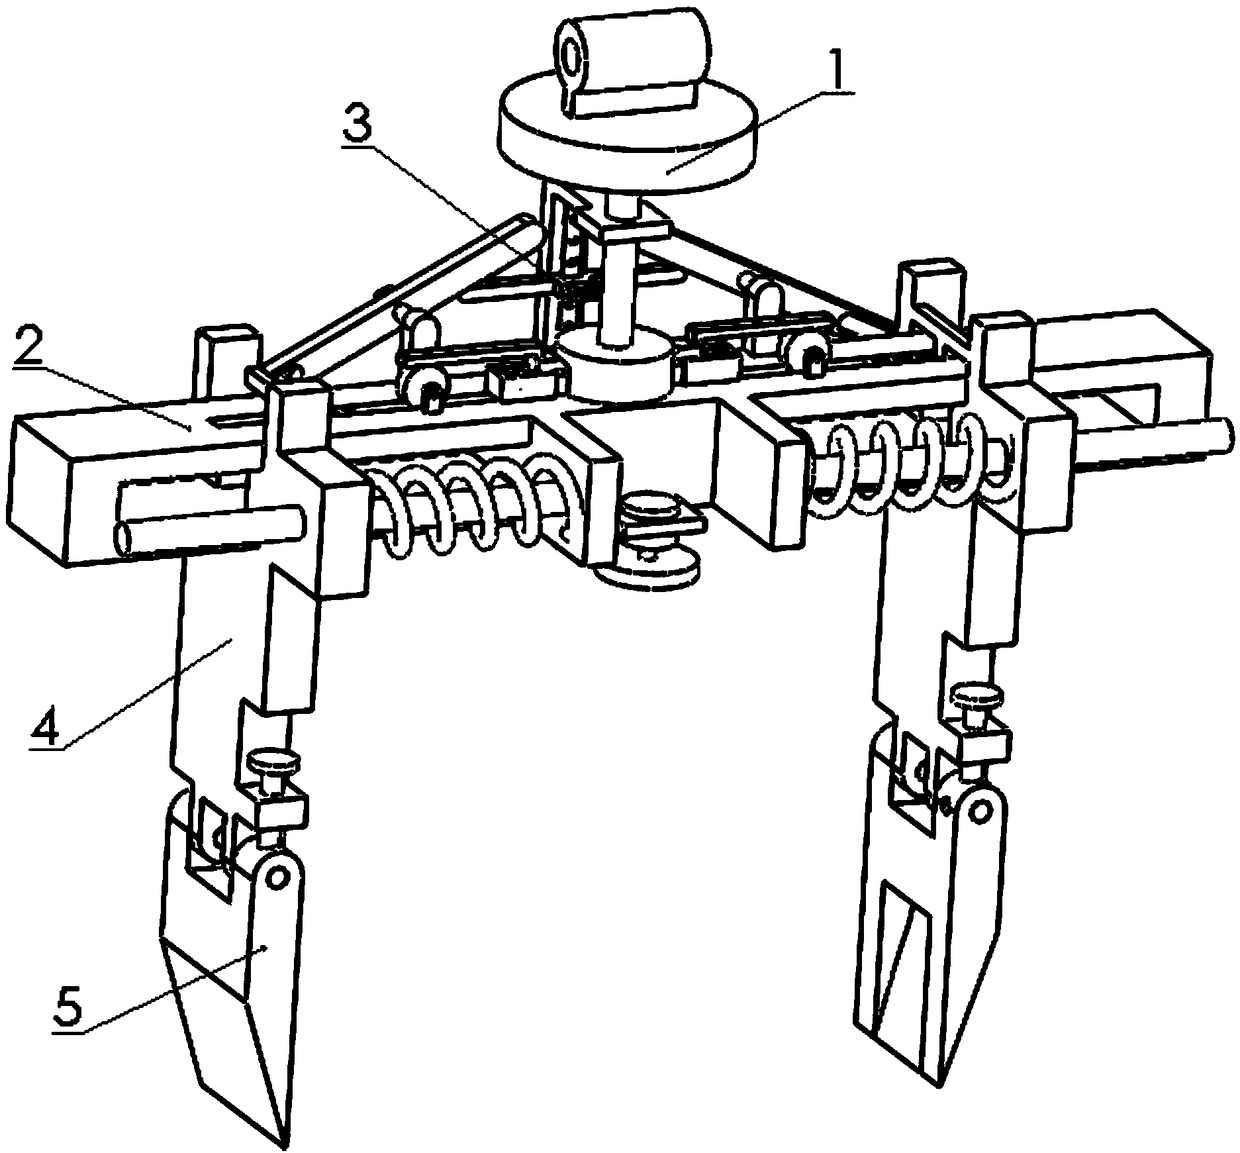 Object clamping device for medical experiment